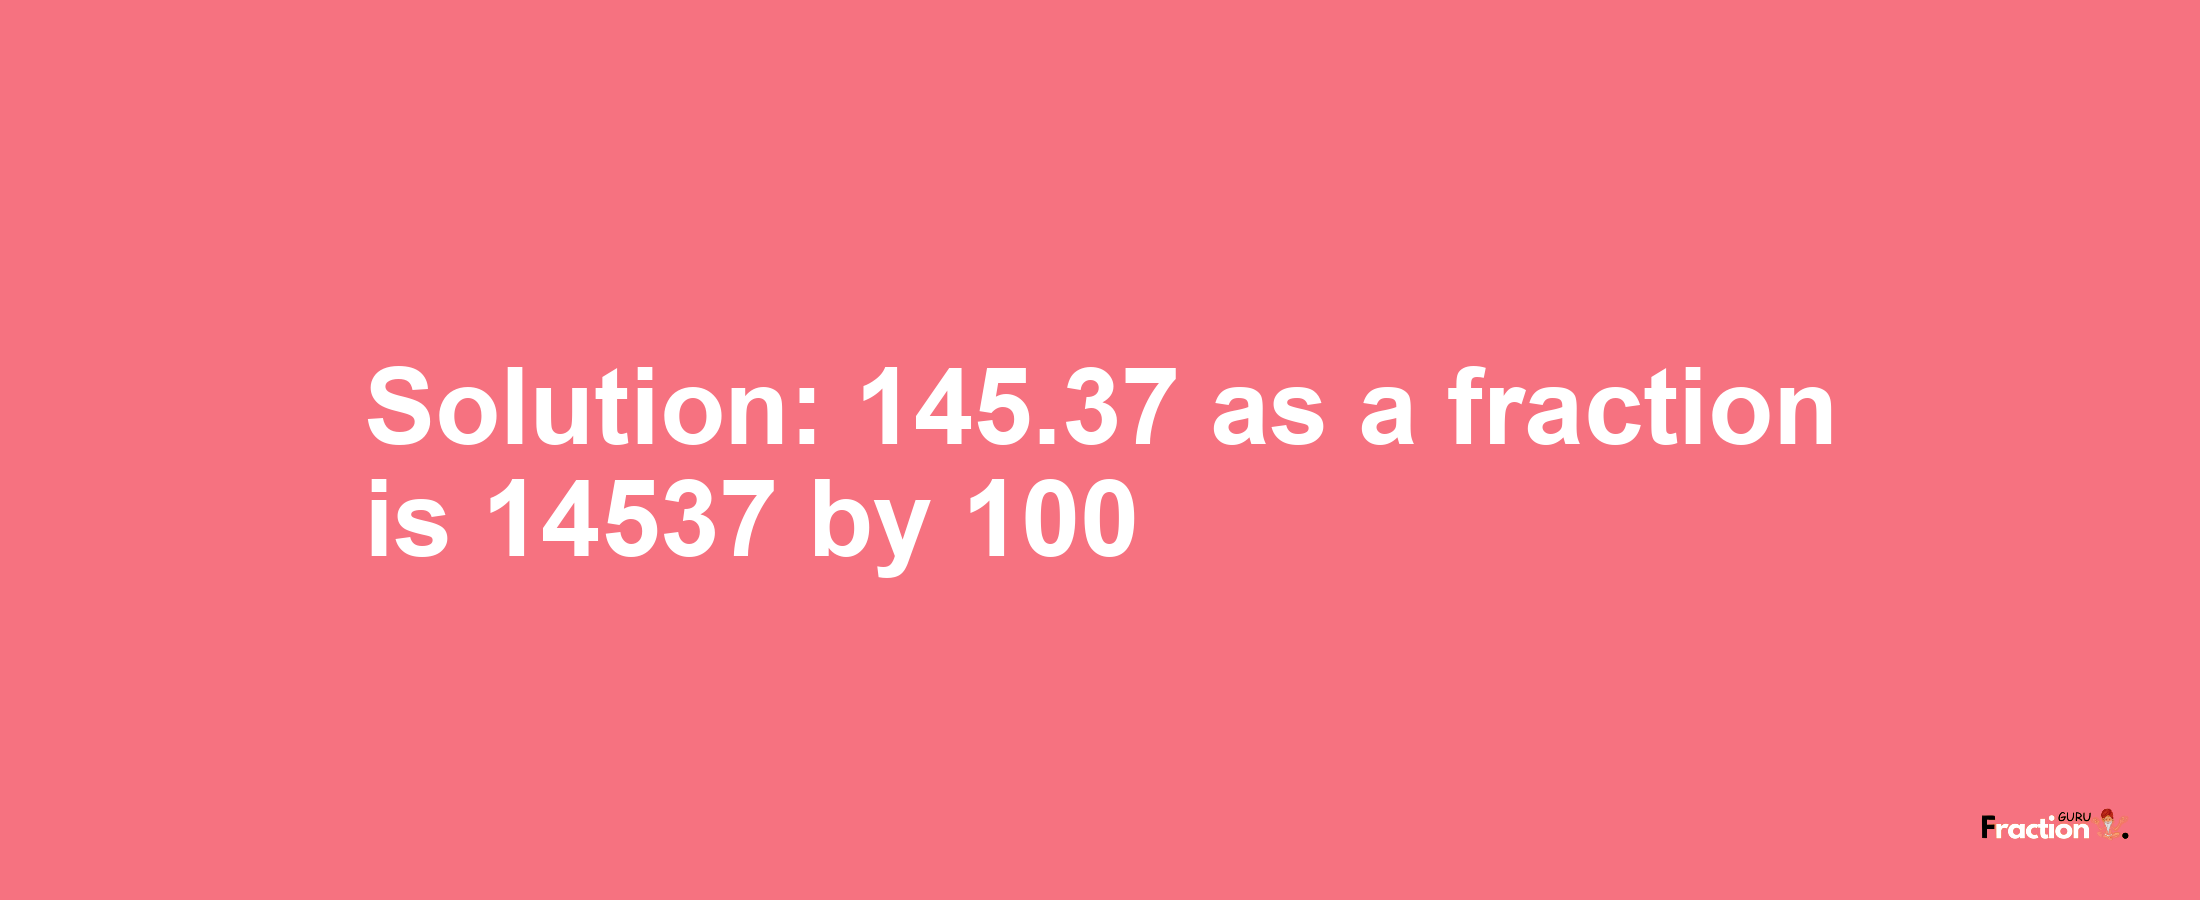 Solution:145.37 as a fraction is 14537/100